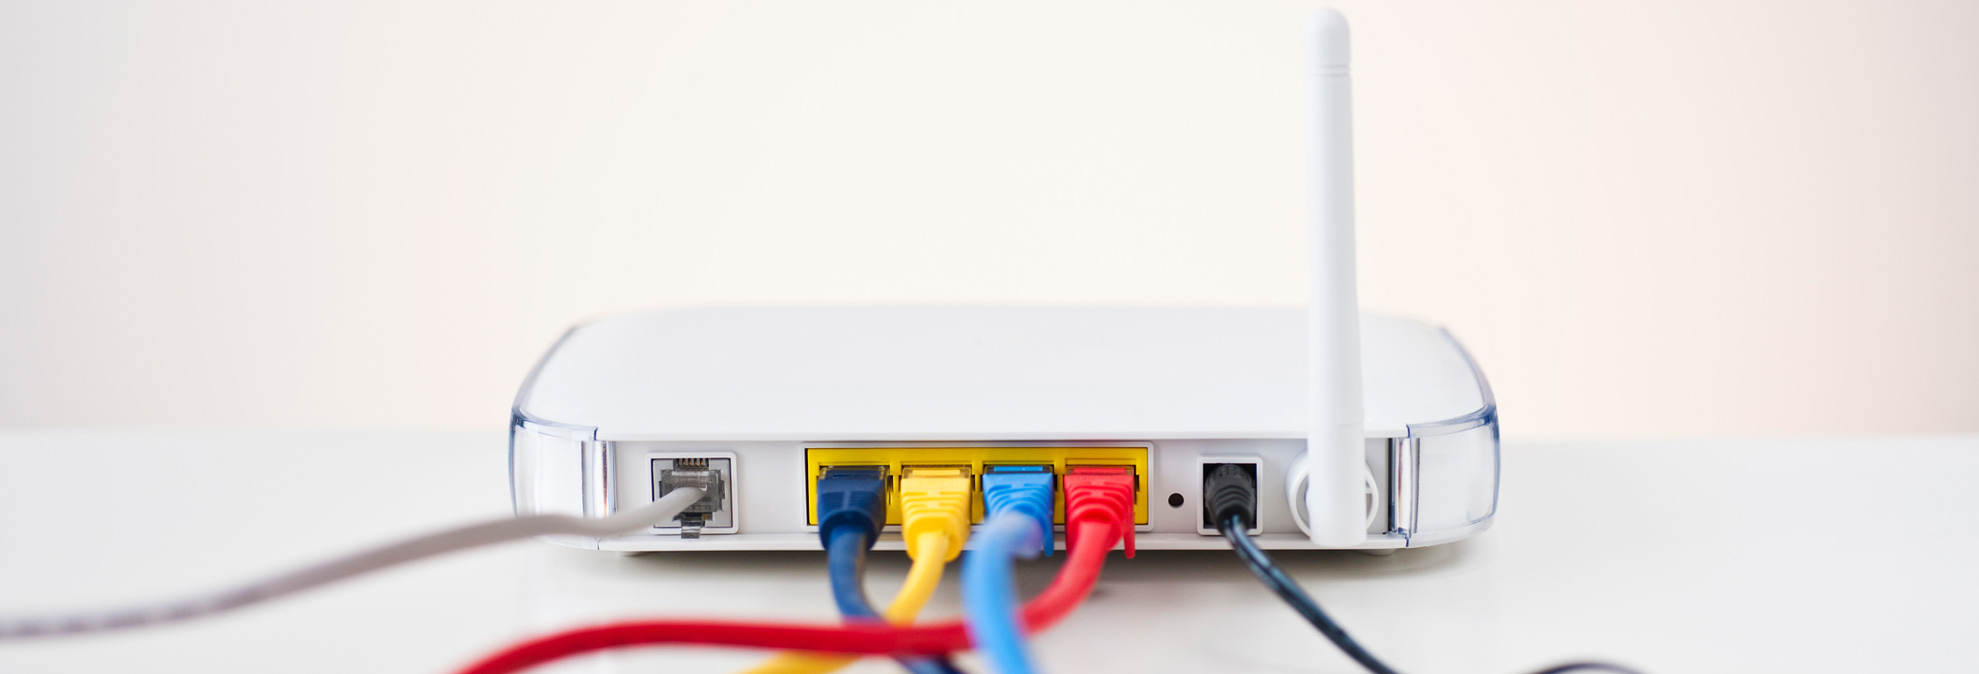 Types of Internet Service for Your Small Businesses